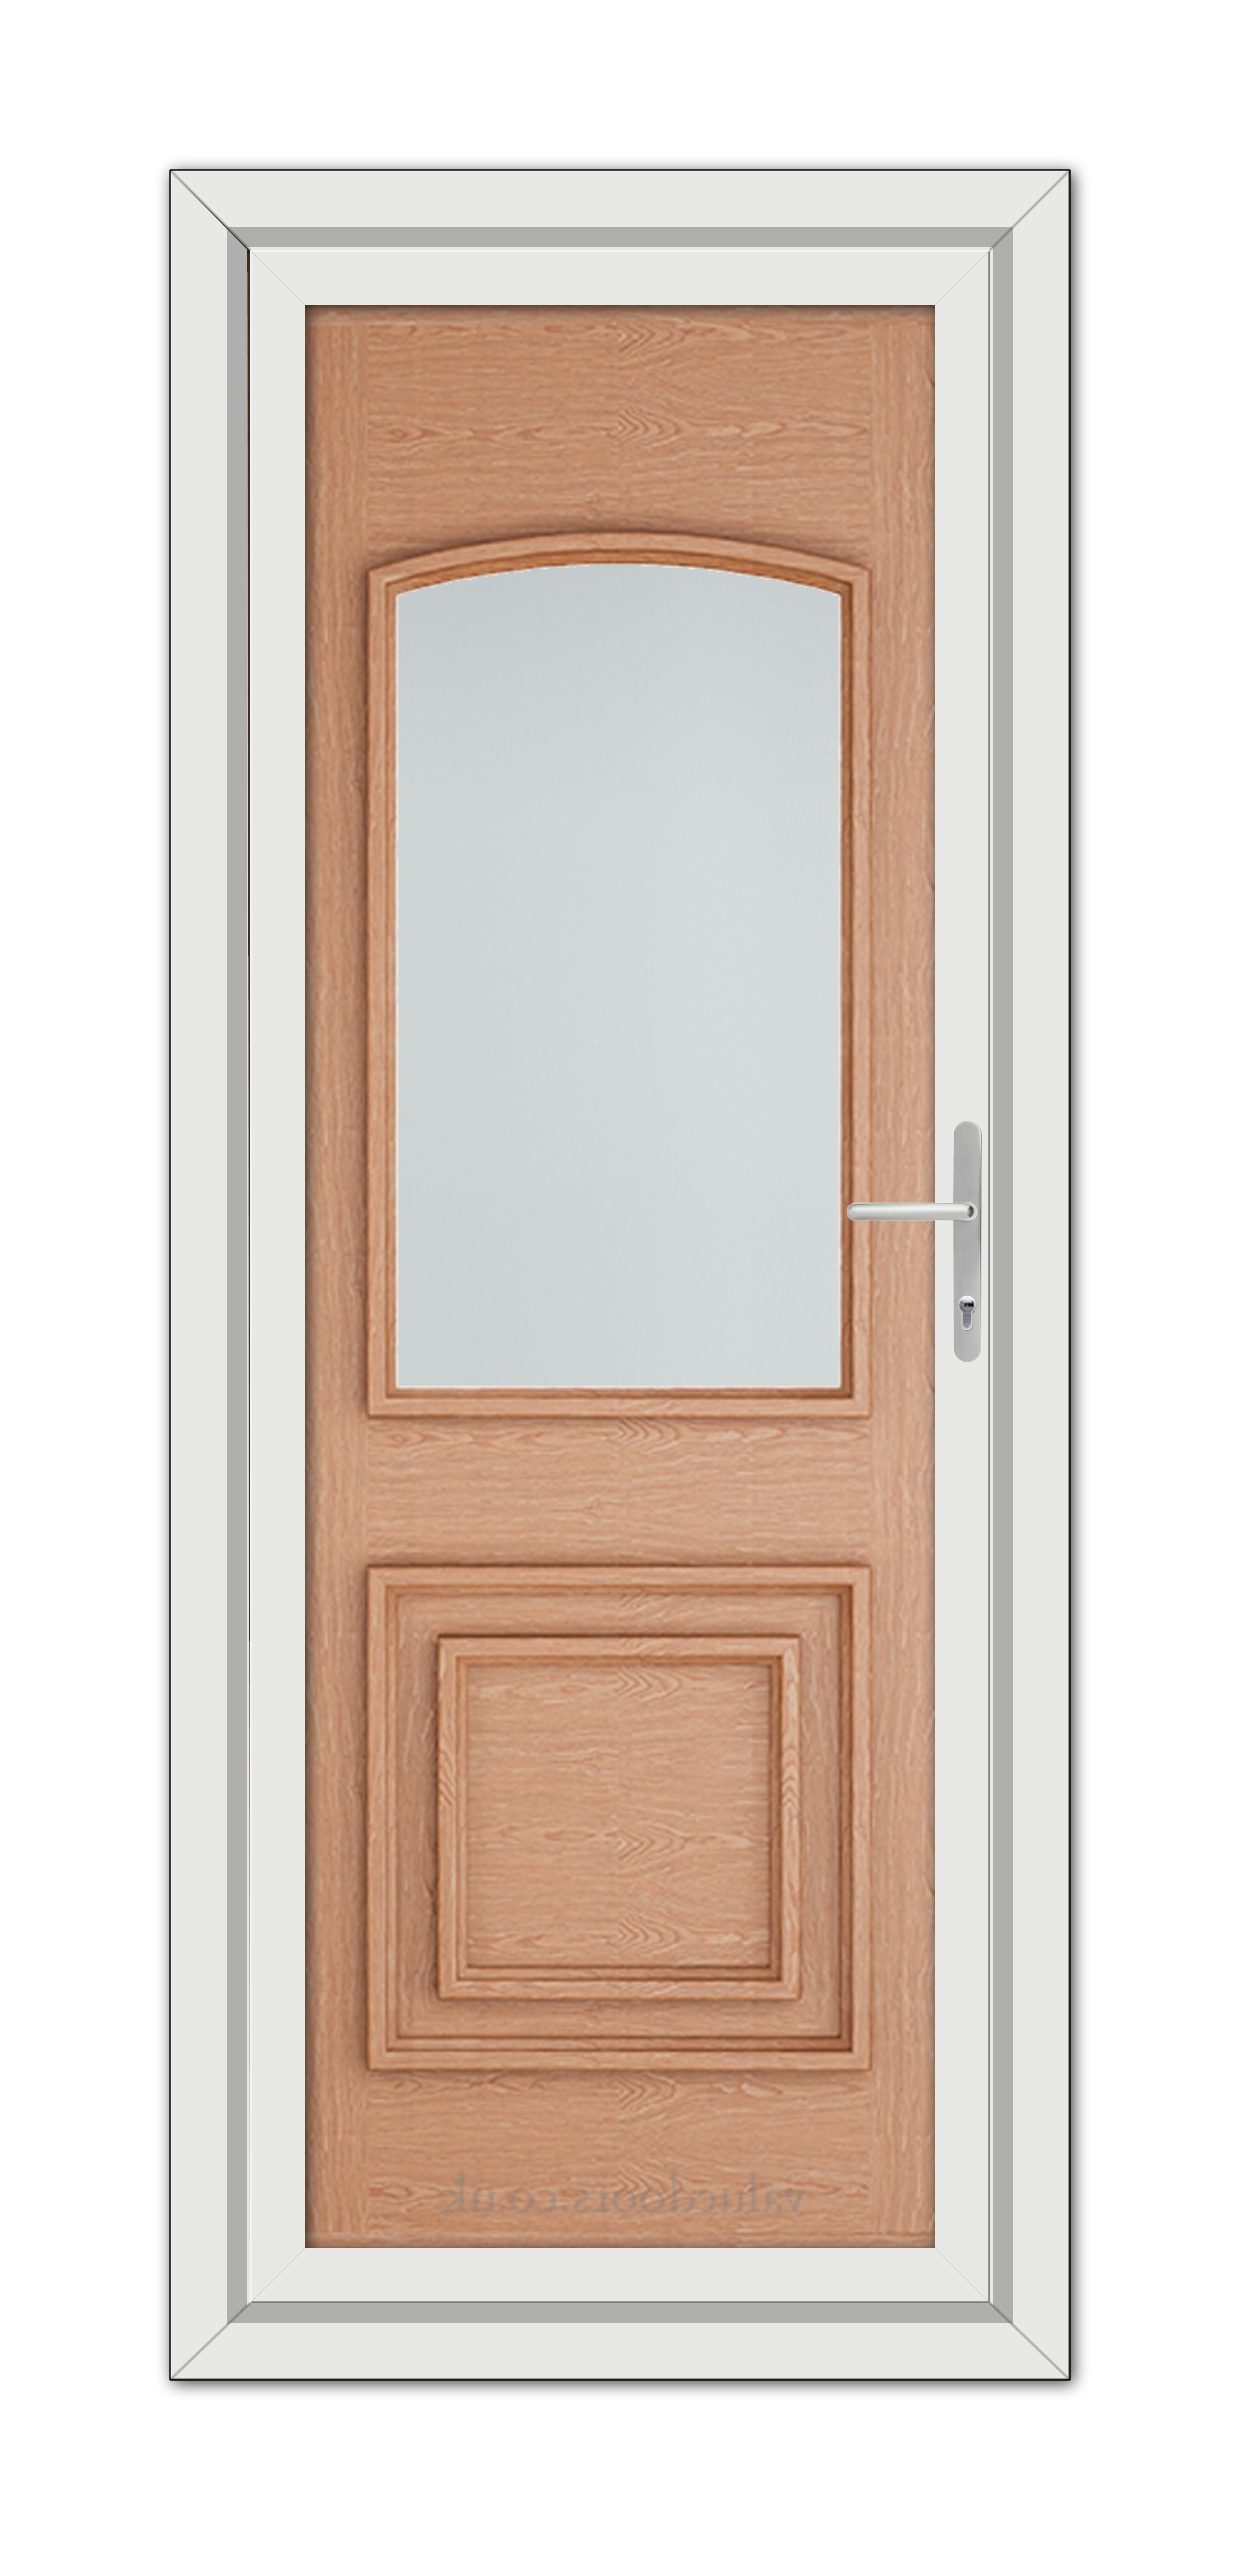 A modern Irish Oak Balmoral Classic uPVC door with a vertical glass panel and metal handle, set within a white frame.